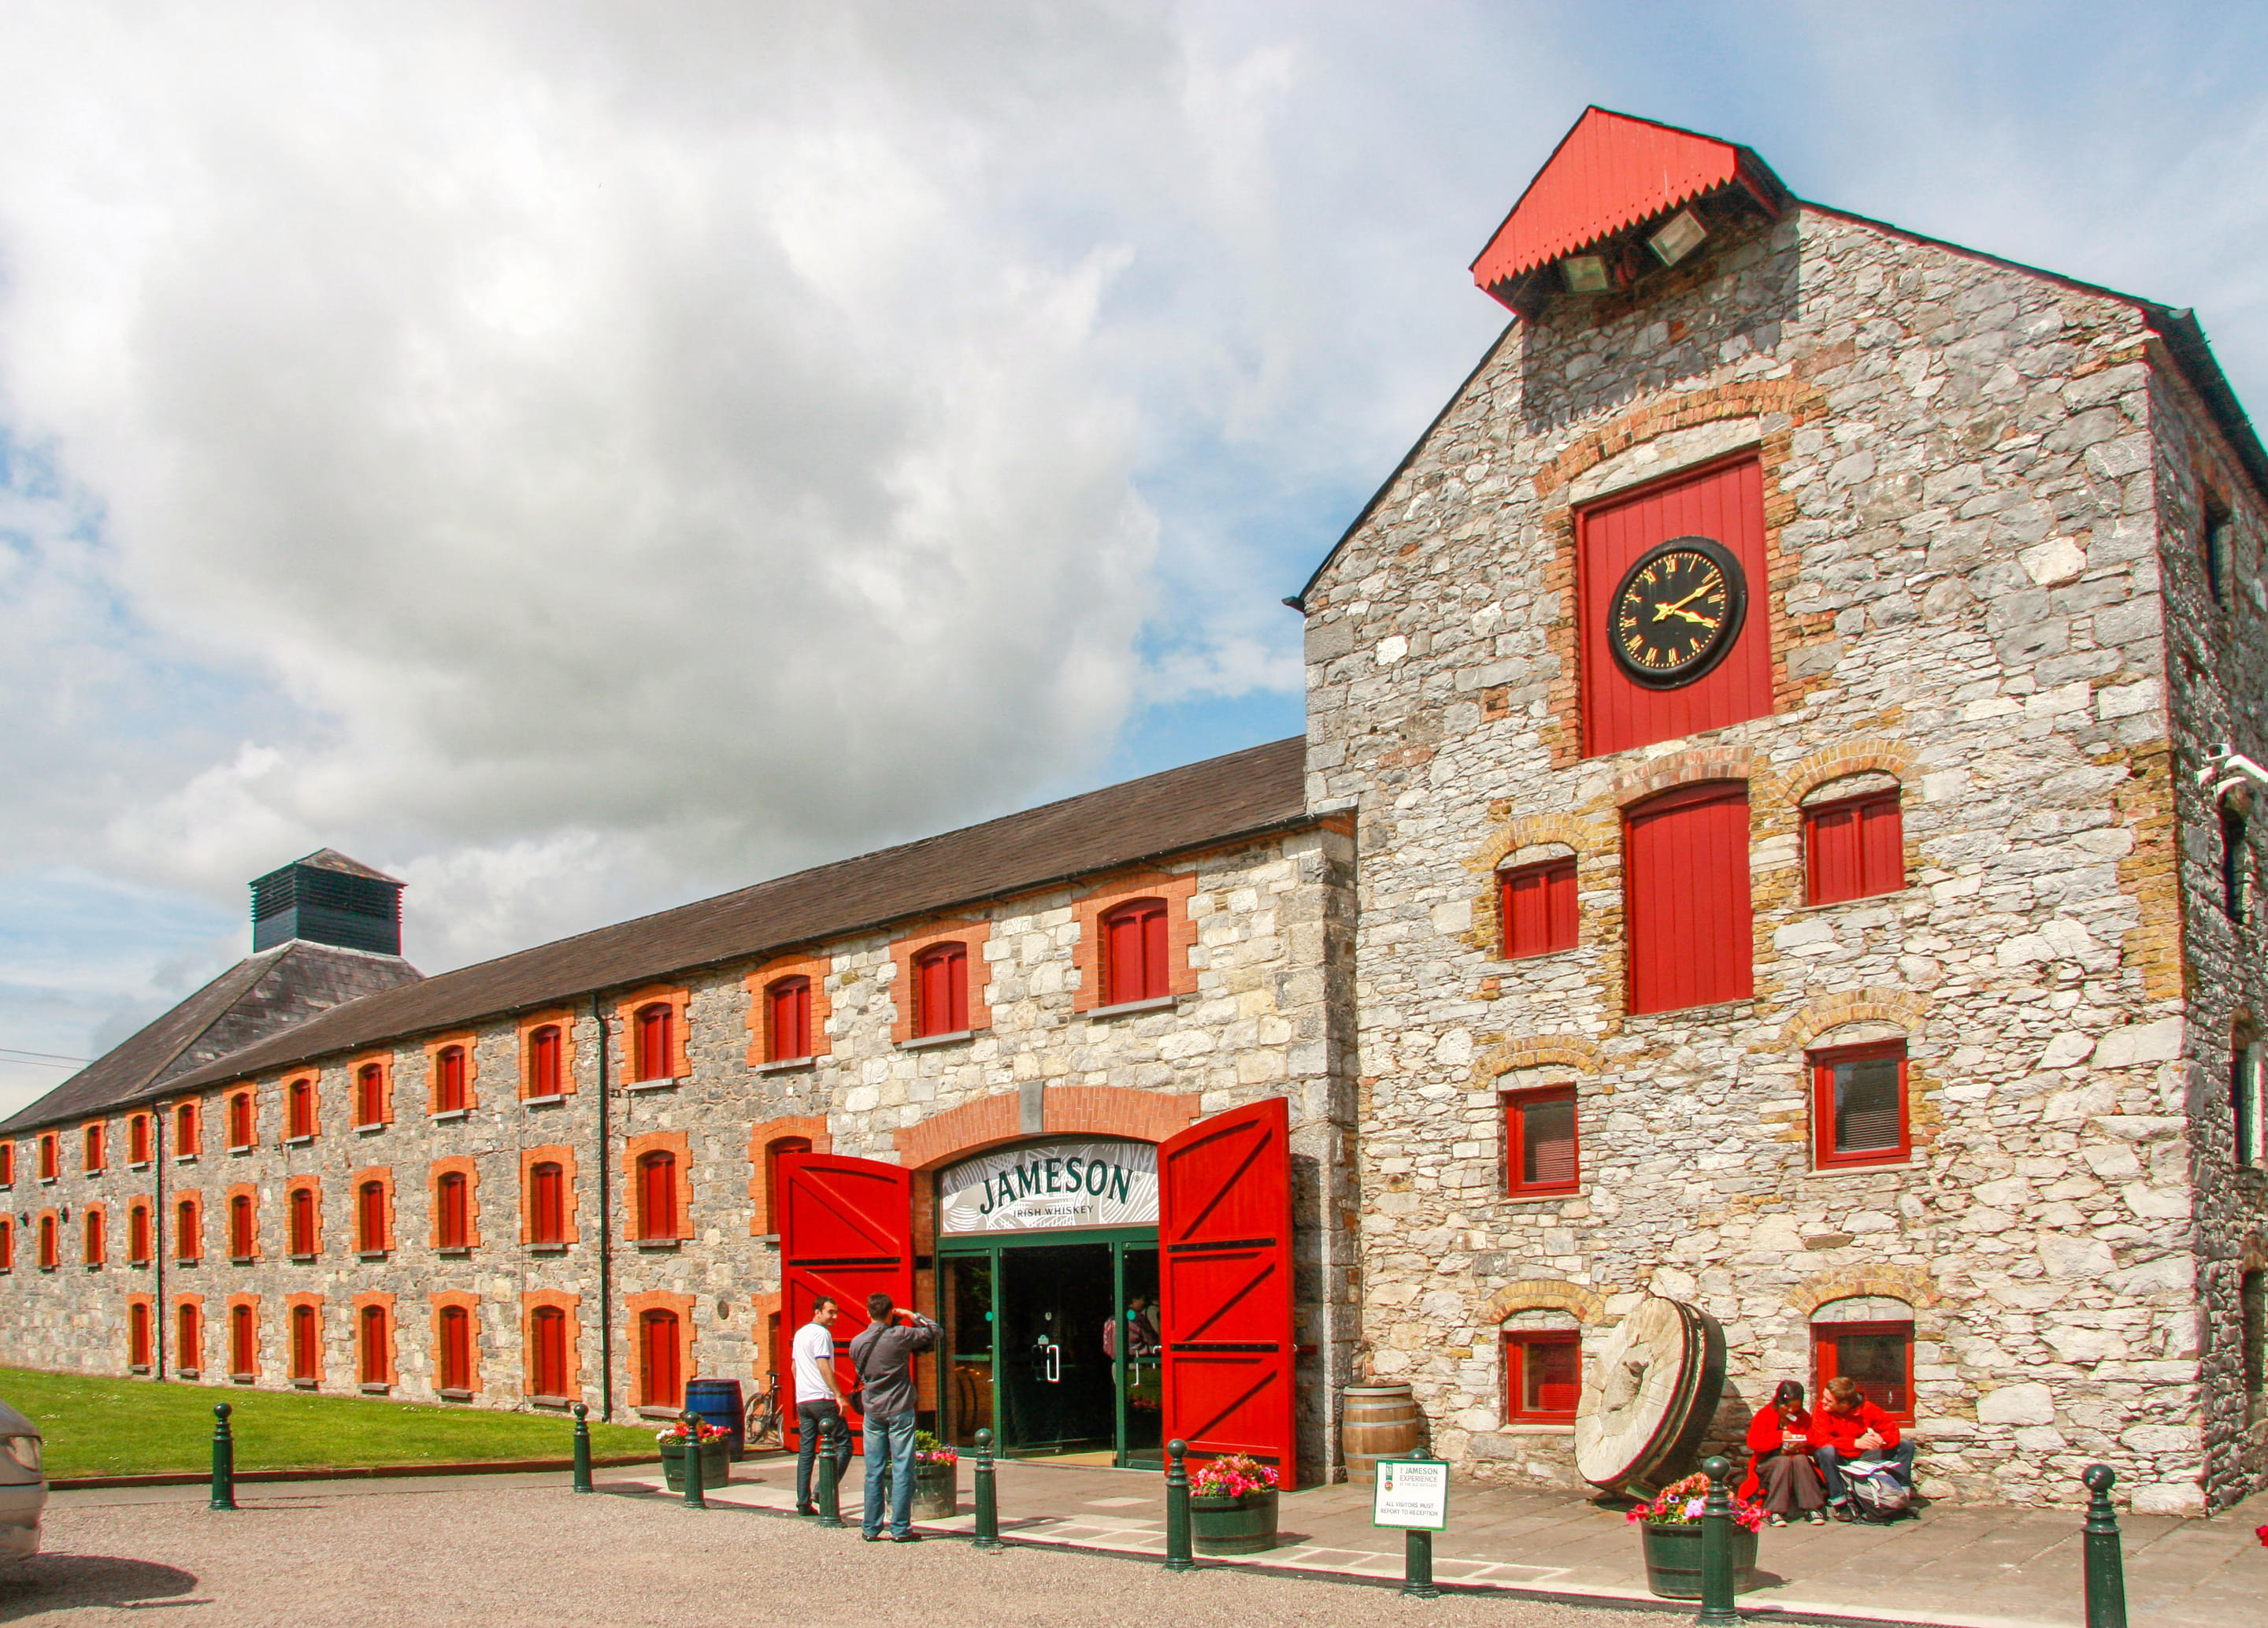 The Old Jameson Distillery Overview